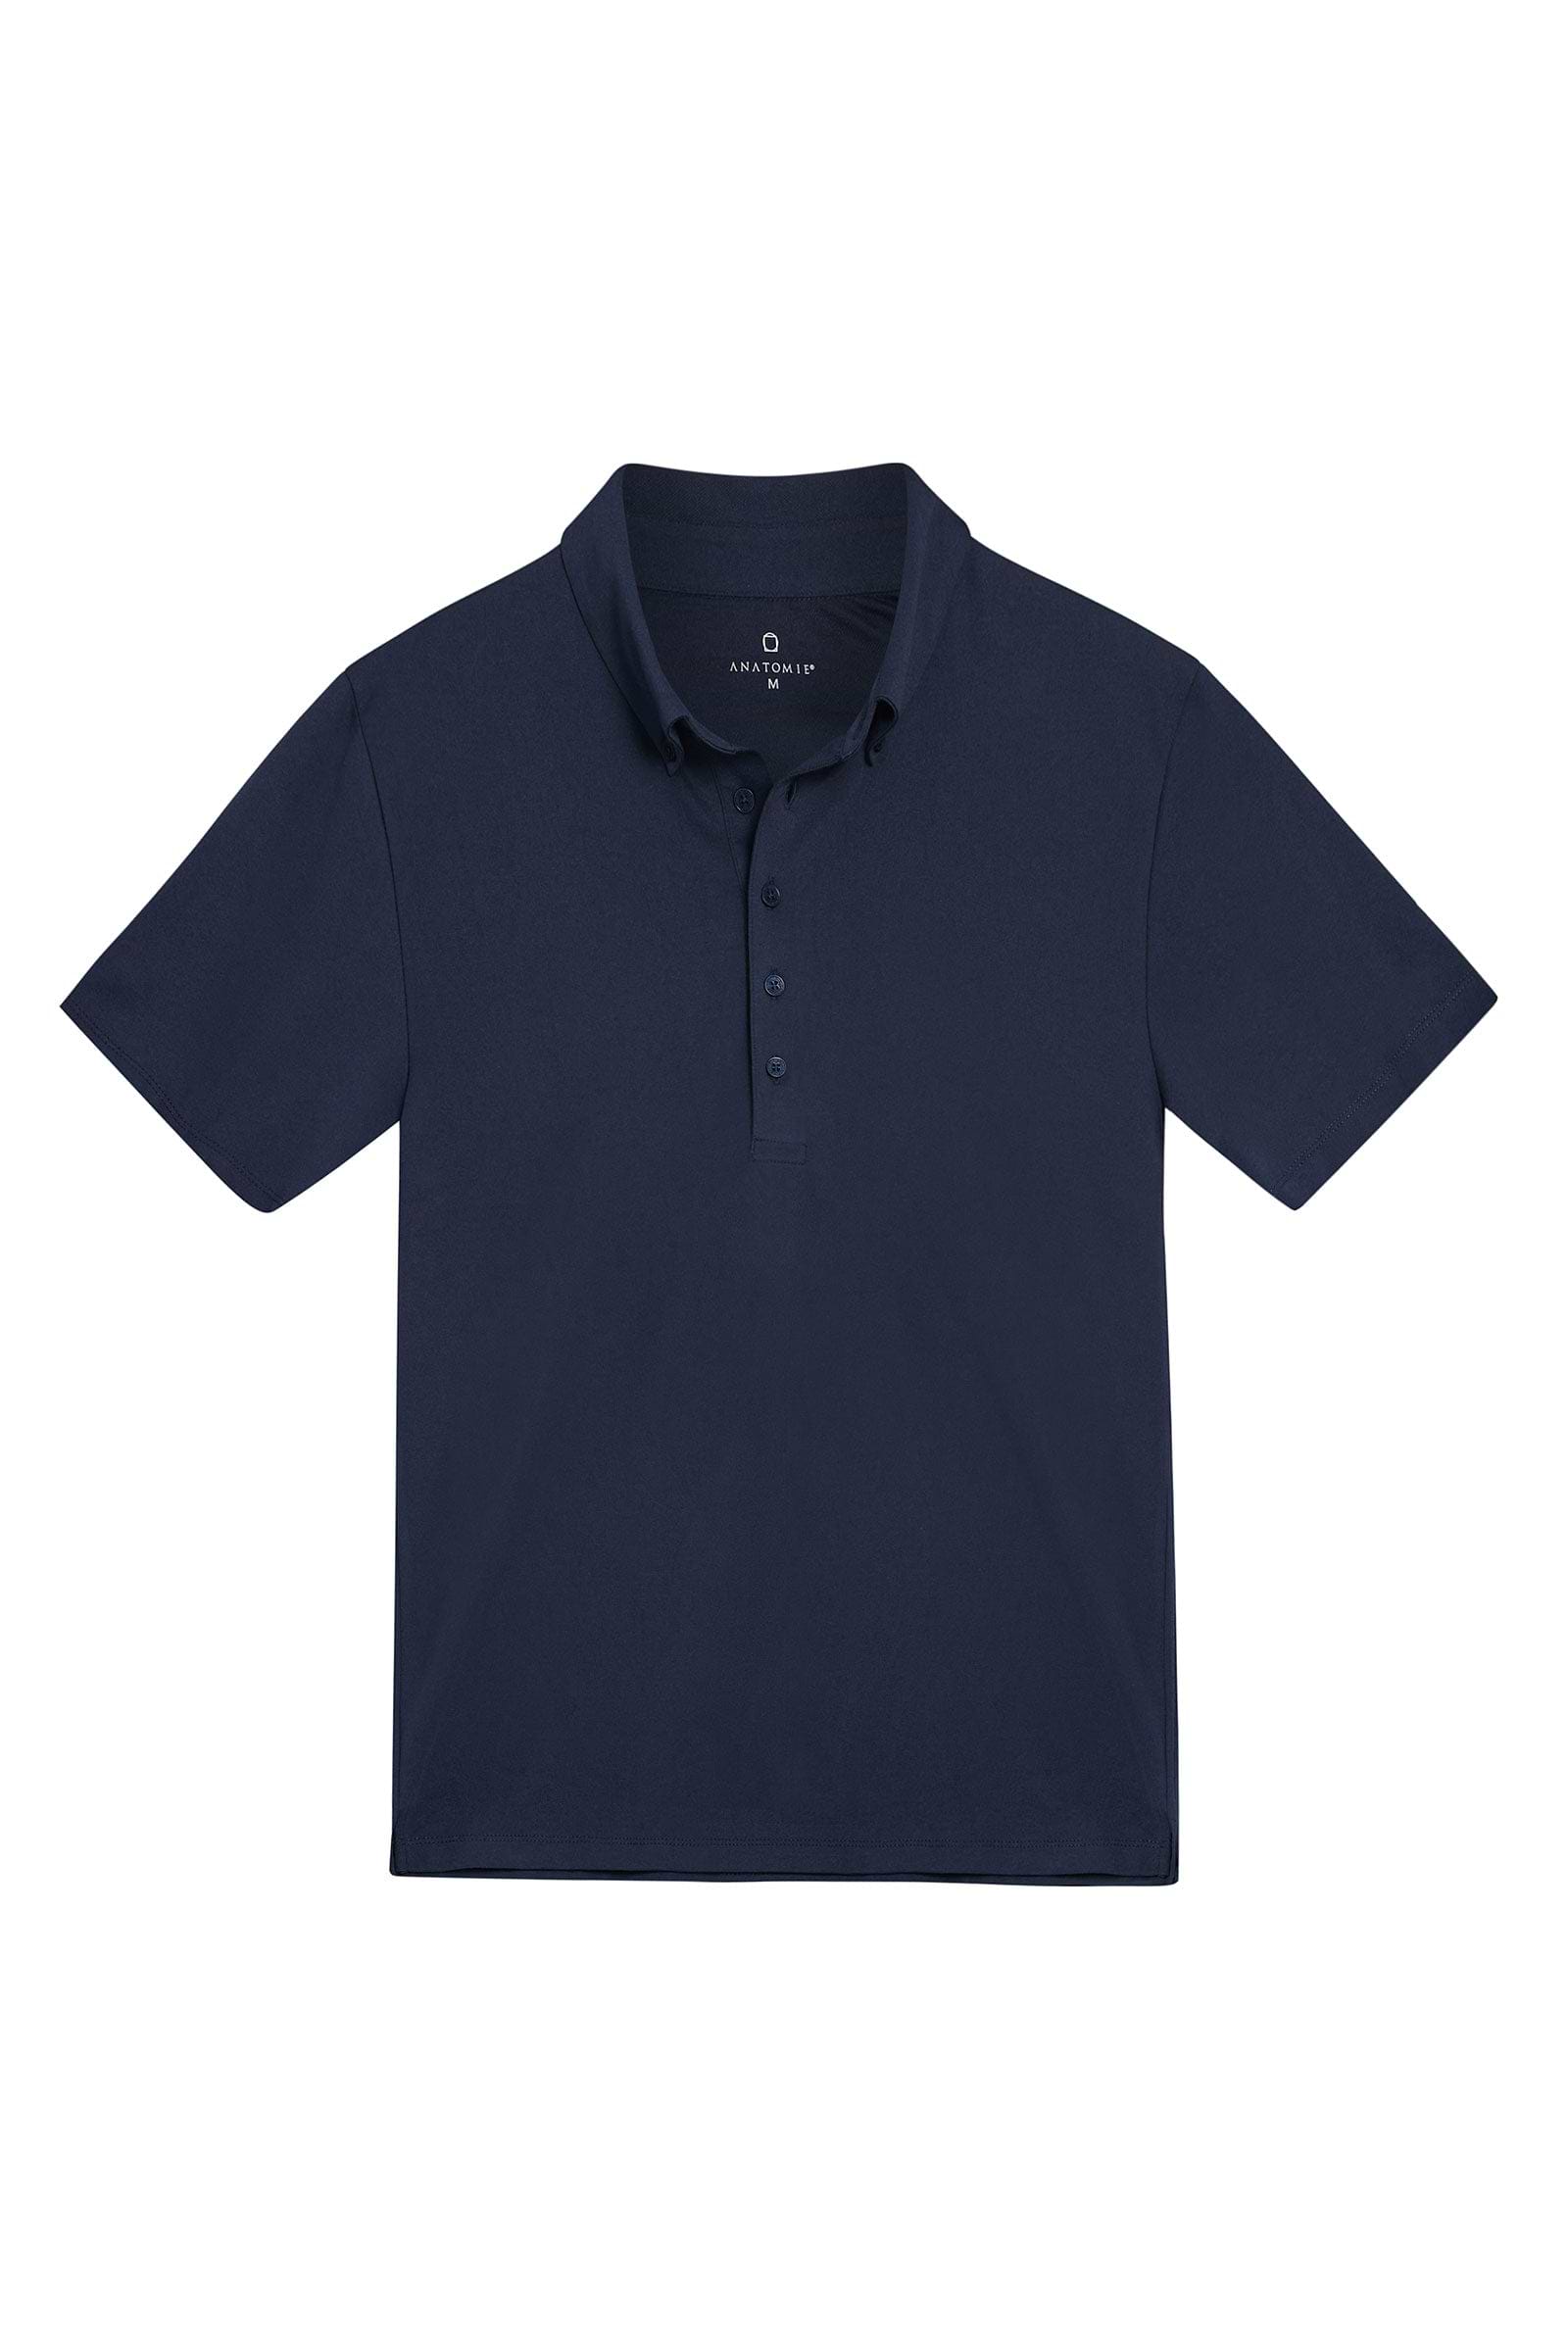 The Best Travel Top. Flat Lay of a Men's Ryan Polo in Navy.